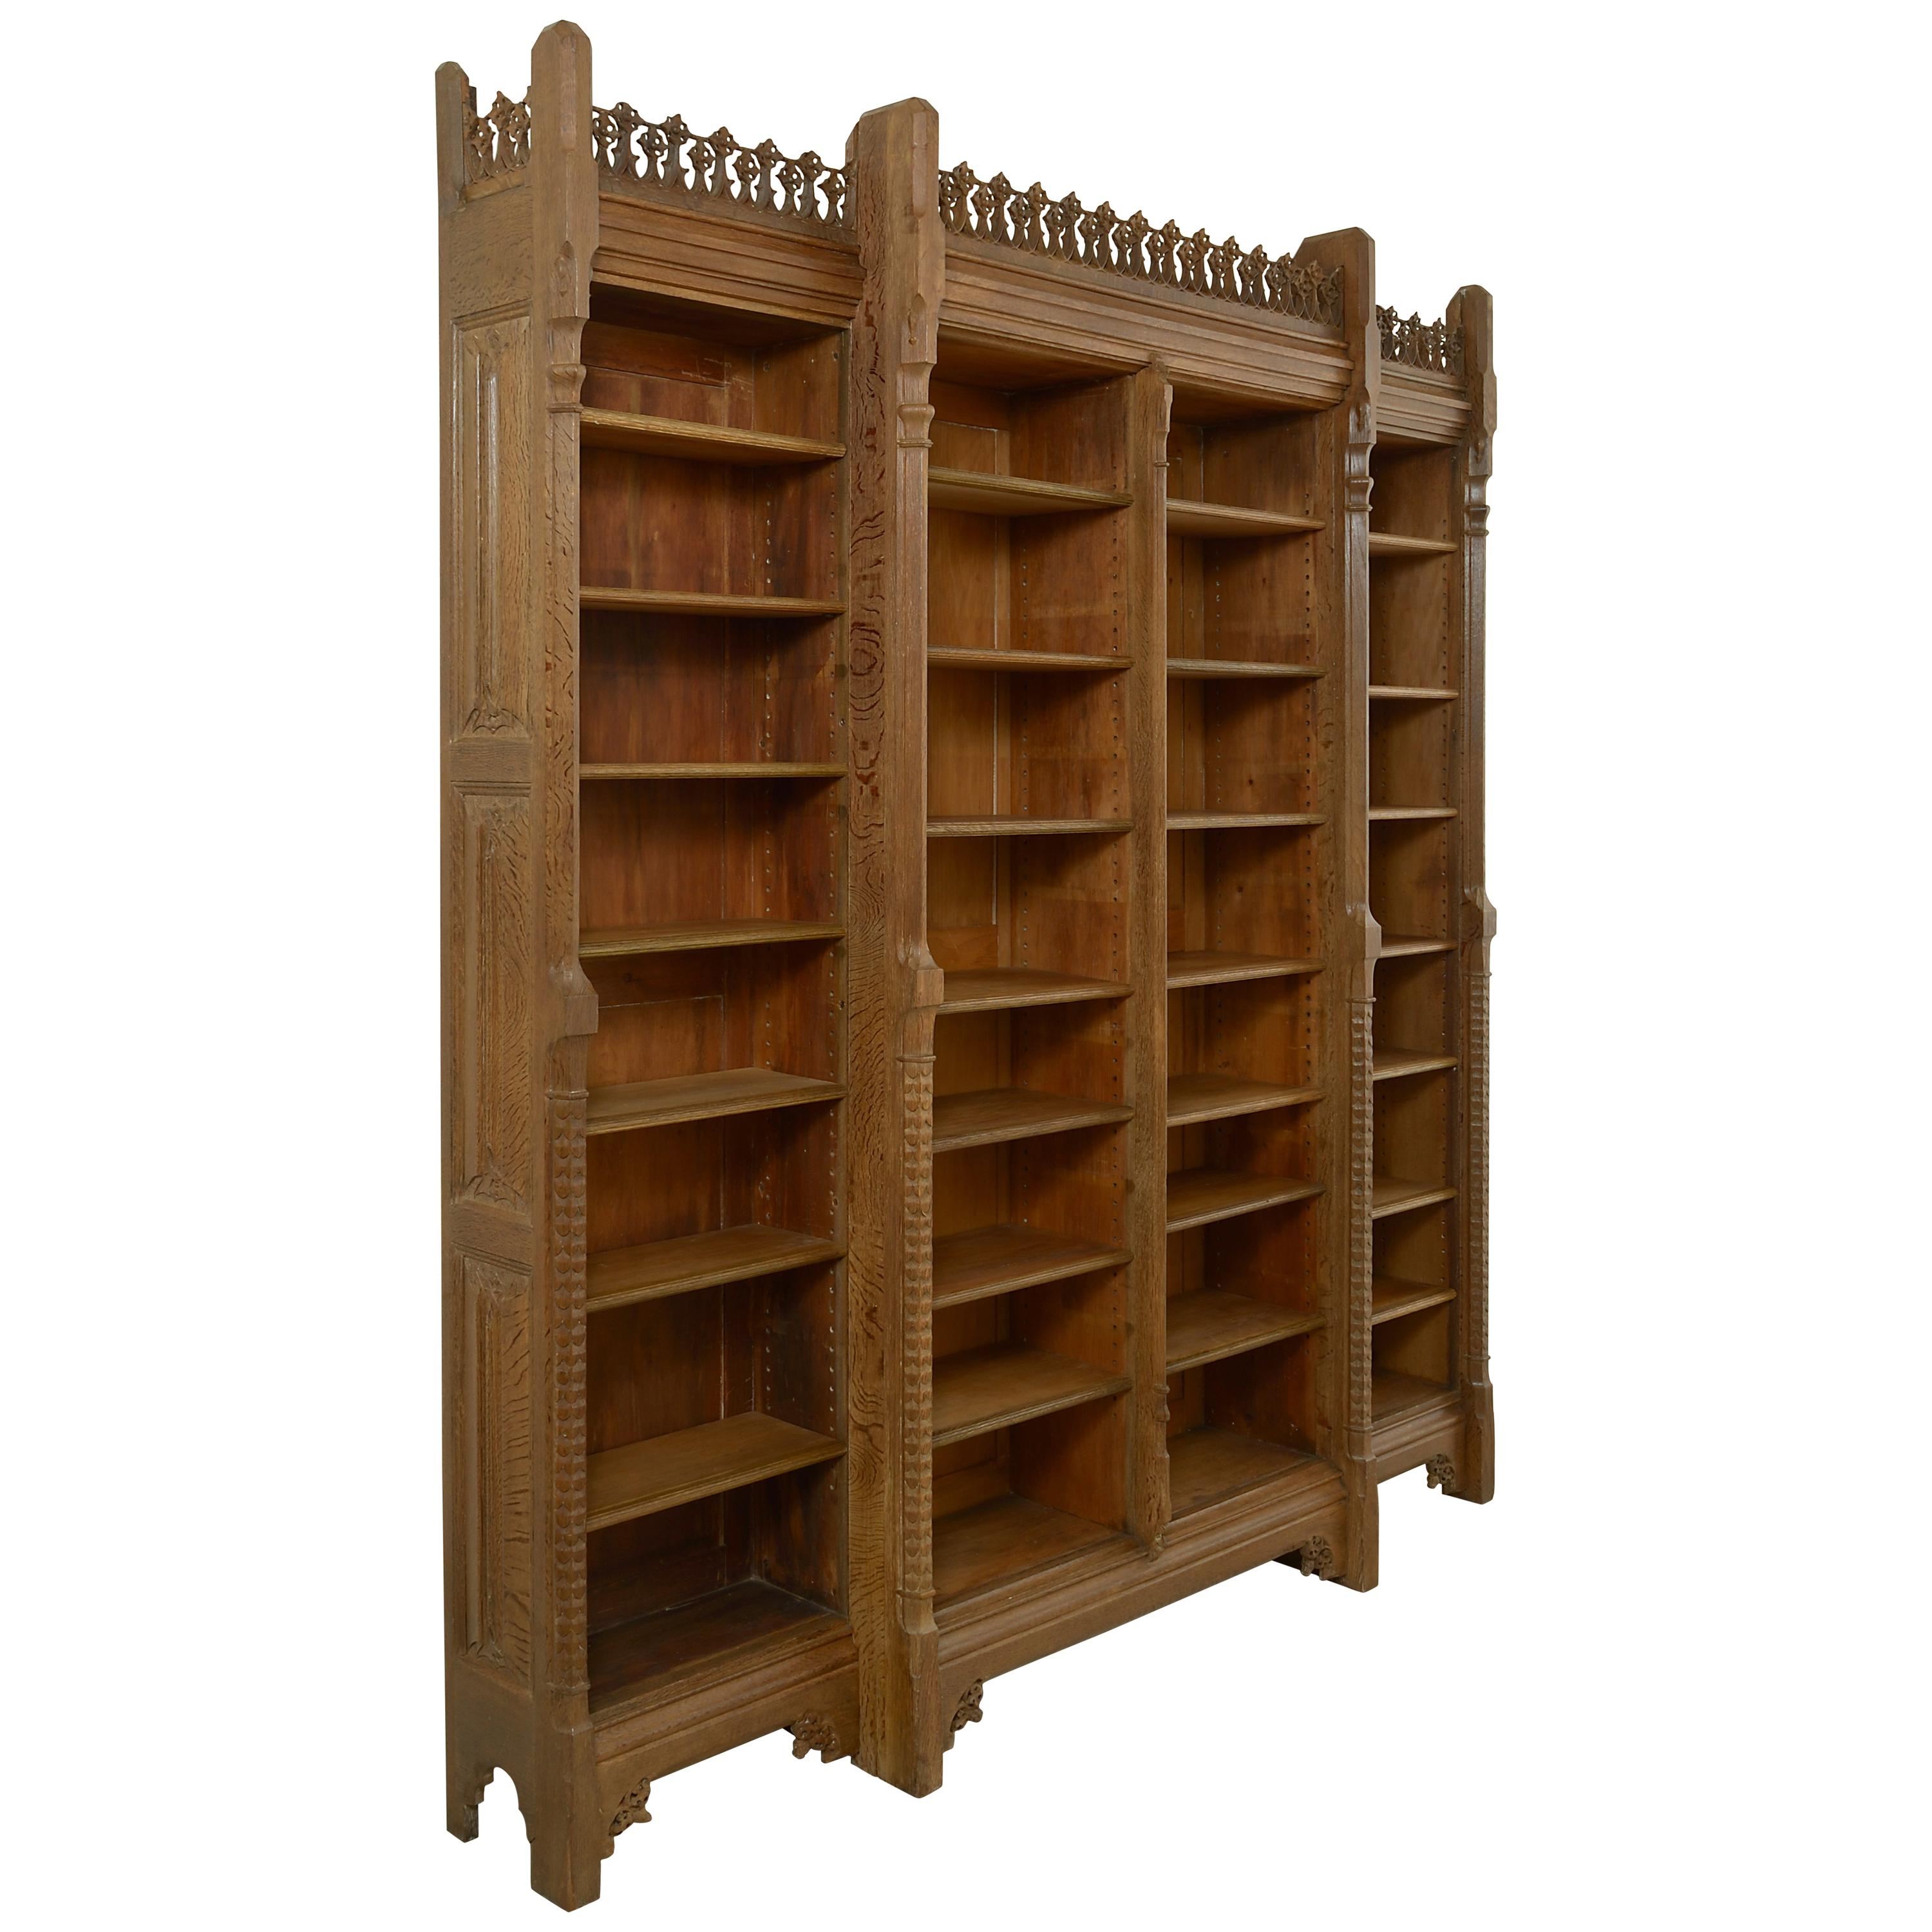 Pugin Bookcase from Horsted Place